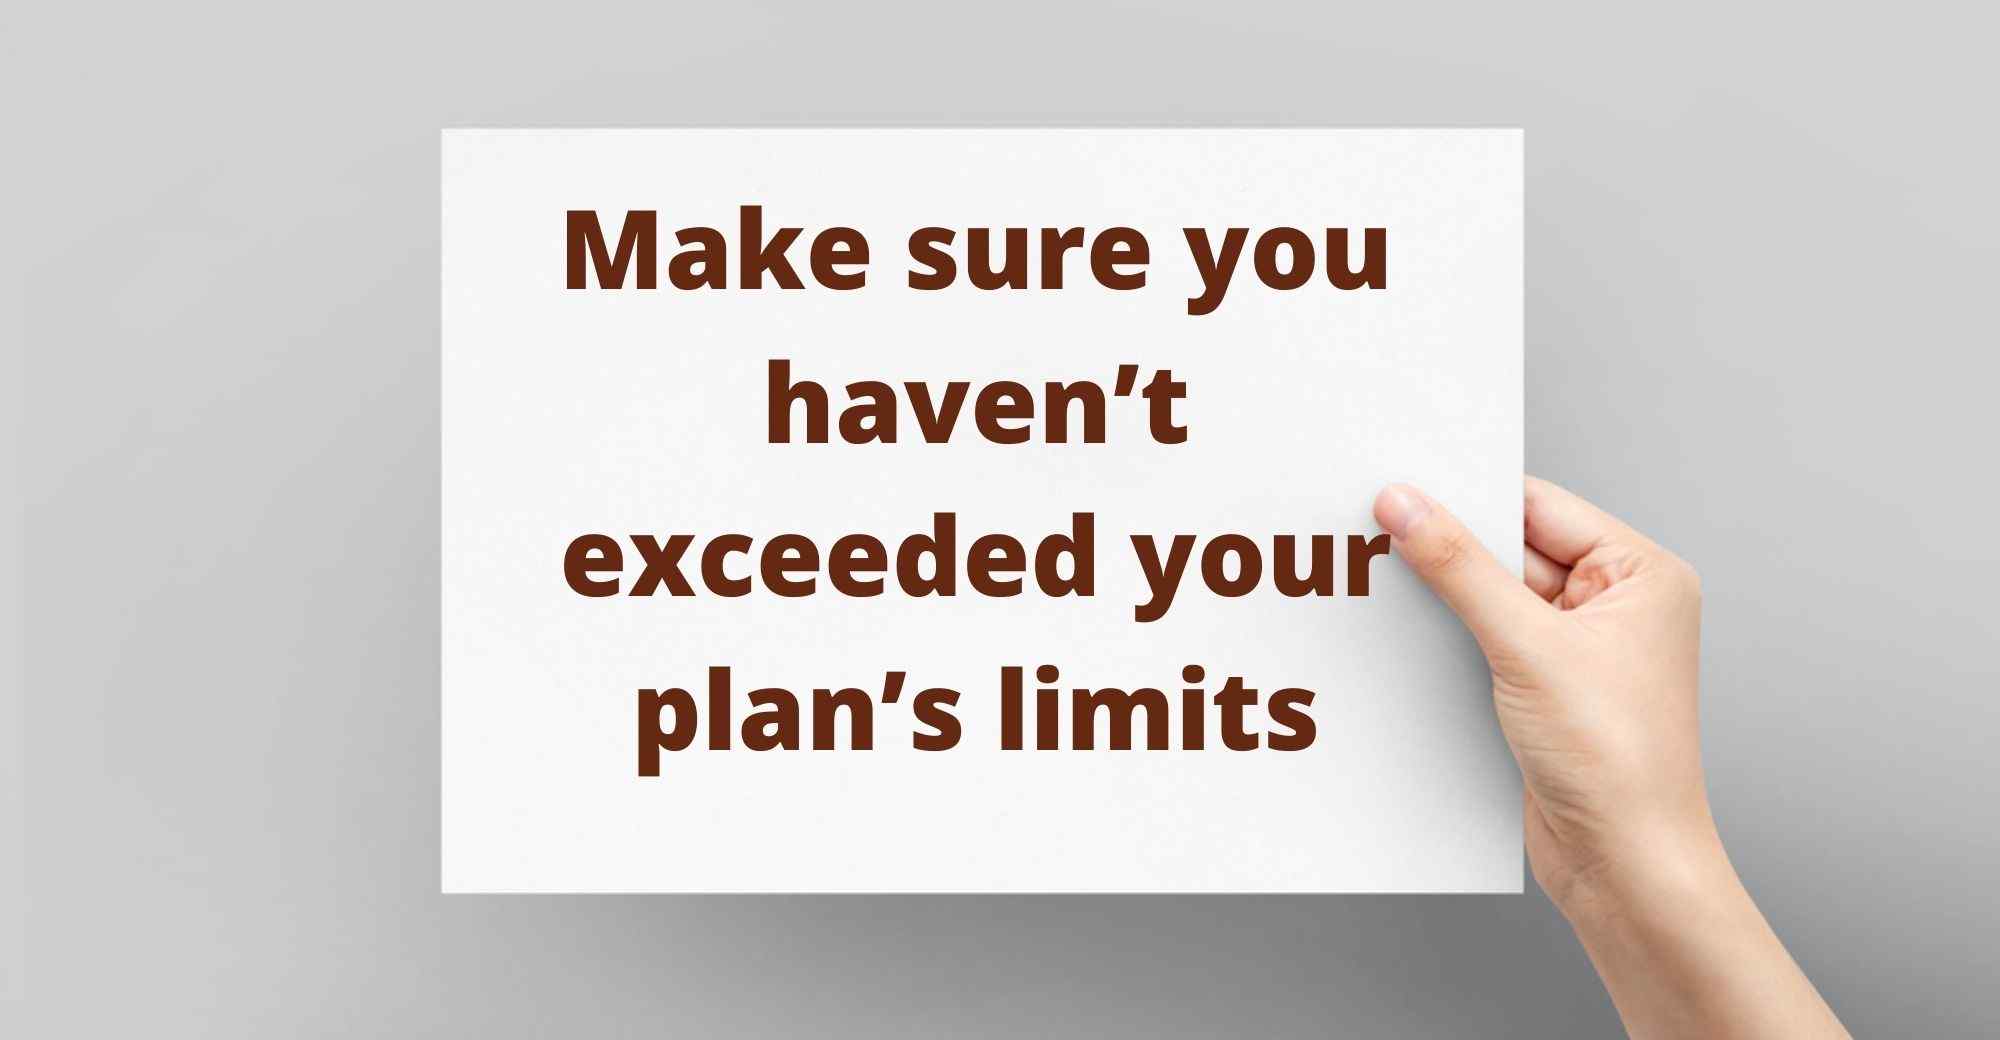 Make sure you haven’t exceeded your plan’s limits